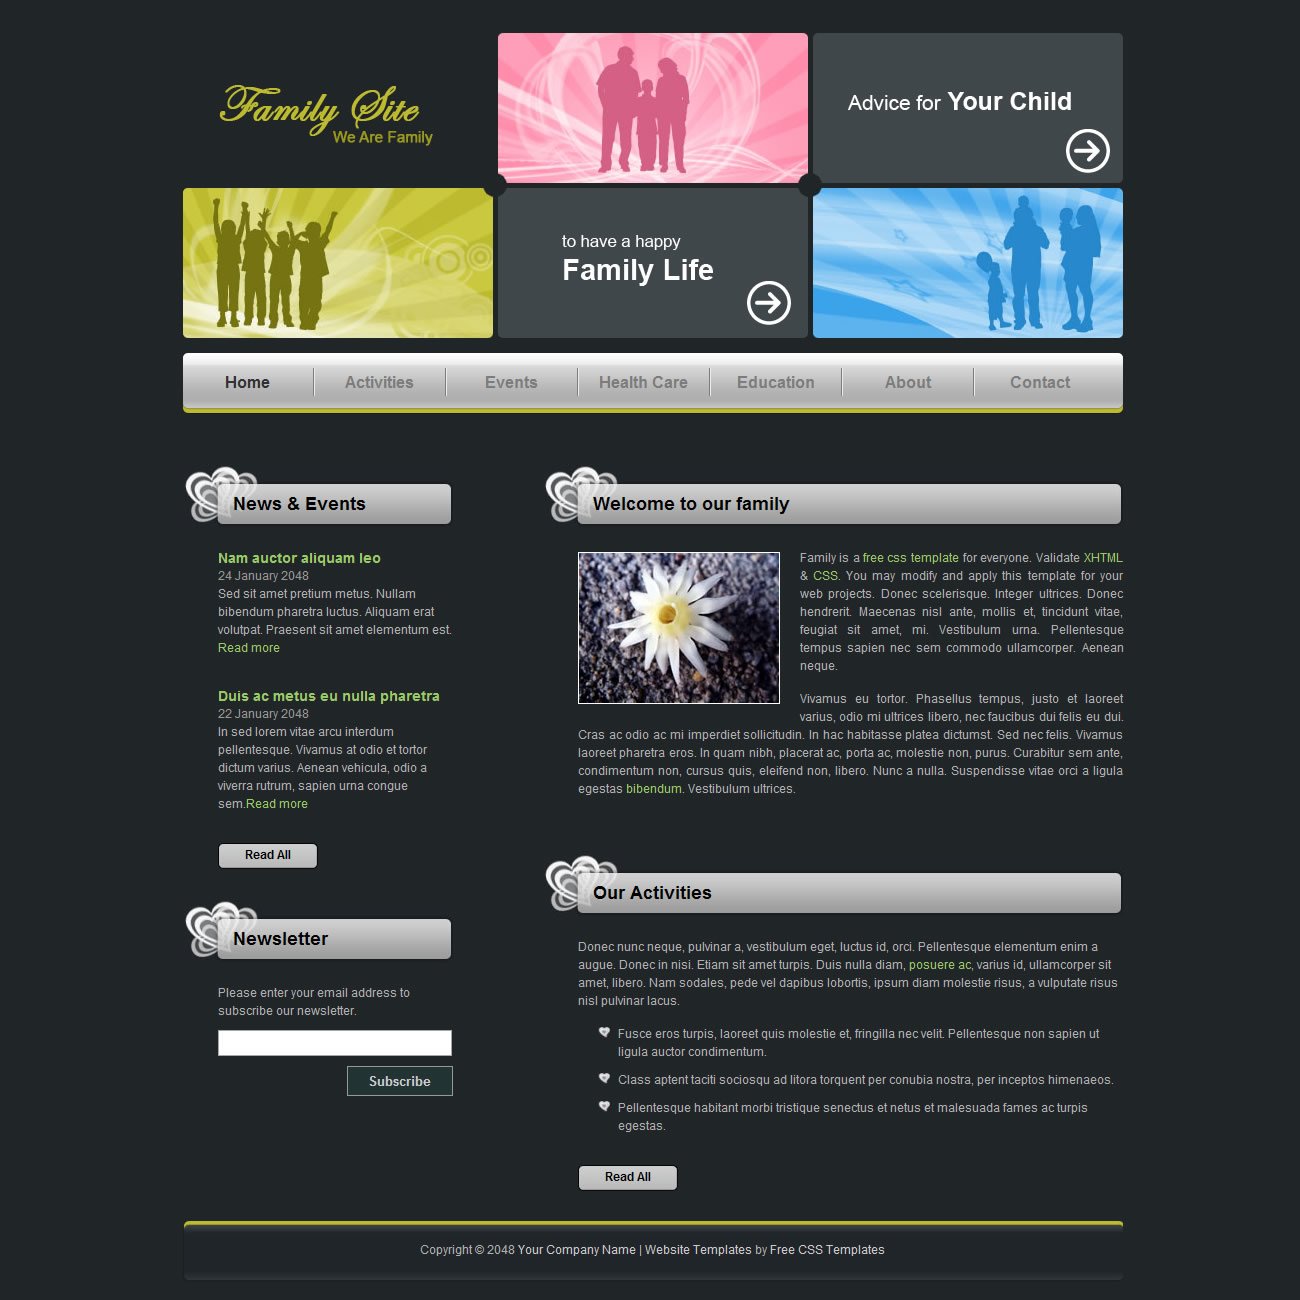 Free CSS Templates Free CSS Website Templates Download Nov 2018 WG